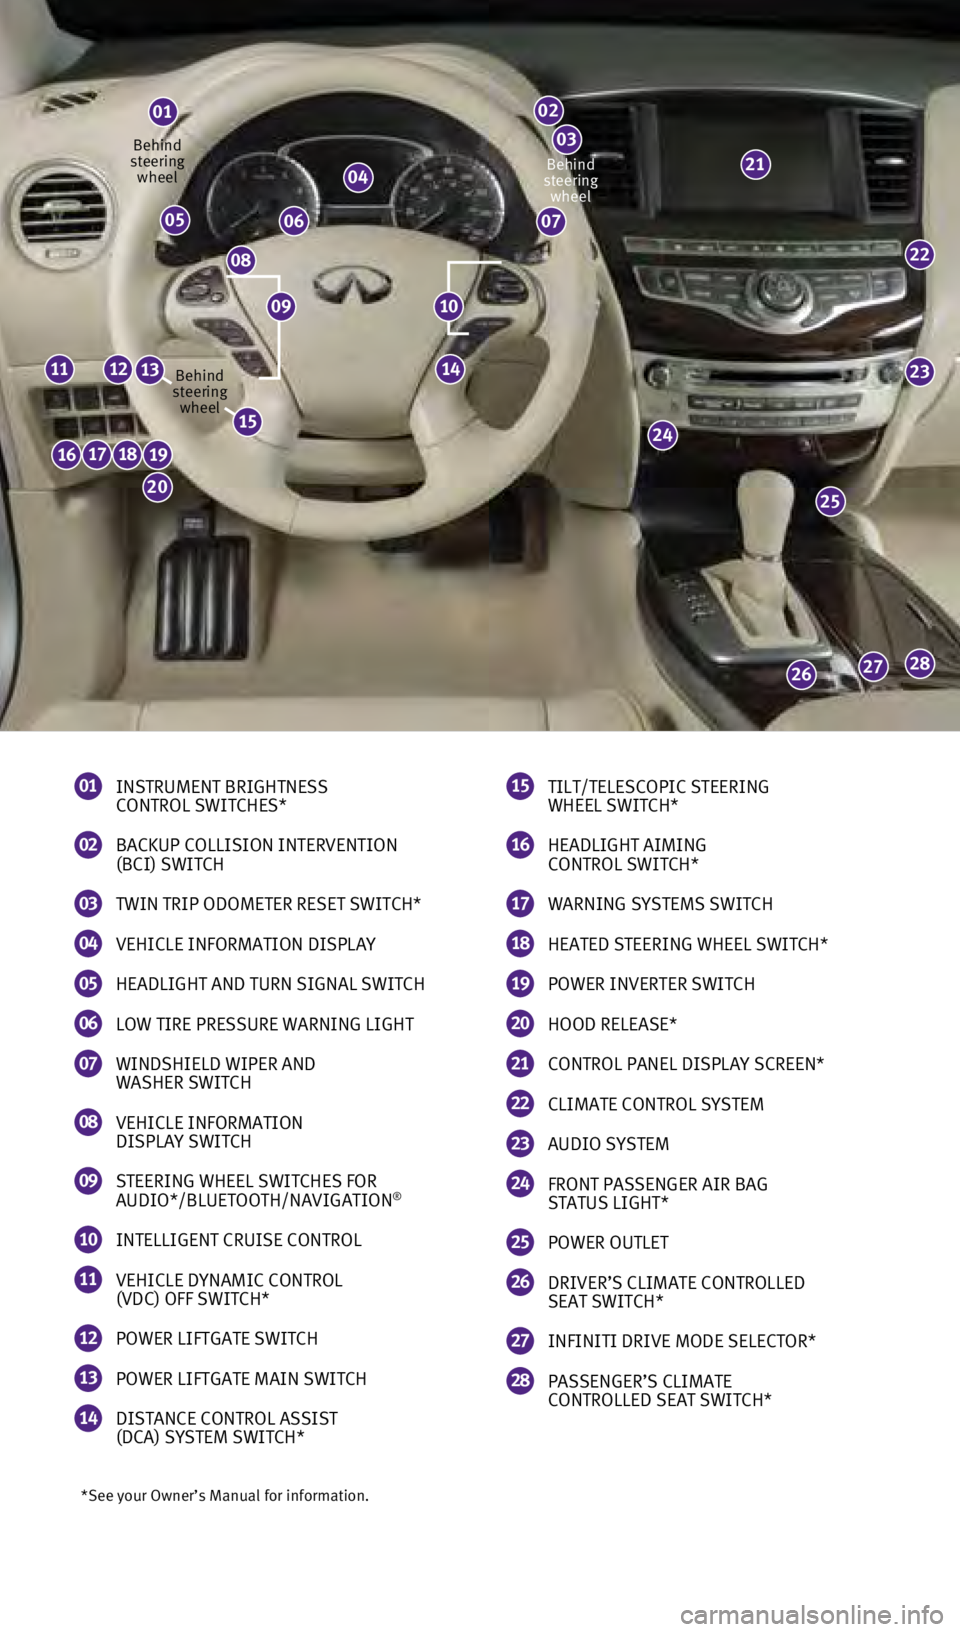 INFINITI QX60 2014  Quick Reference Guide 22
23
25
24
282726
16171819
20
111214
21
*See your Owner’s Manual for information.
01 INSTRUMENT BRIGHTNESS  CONTROL SWITCHES* 
02 BACKUP COLLISION INTERVENTION  (BCI) SWITCH 
03 TWIN TRIP ODOMETER 